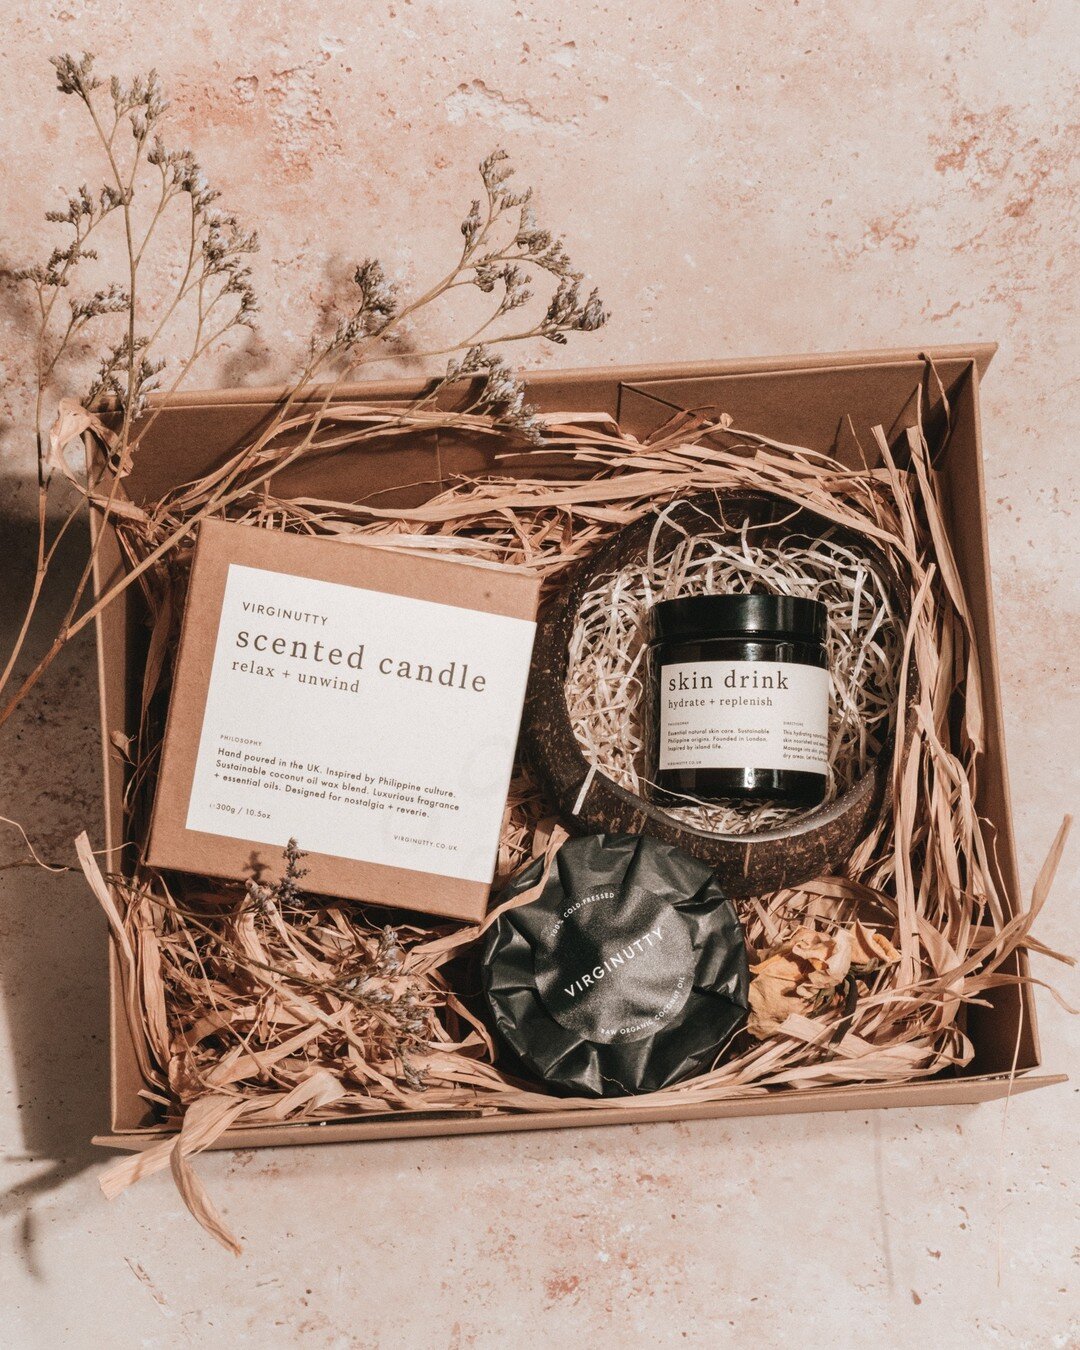 As we continue to celebrate women&rsquo;s month, let's also big up all the Mamas in the world for Mother's Day this Sunday, March 14th!

Have you got a gift for your Mama yet? Check out our 'Love Nest&rsquo; giftbox - a lovely eco-friendly present th